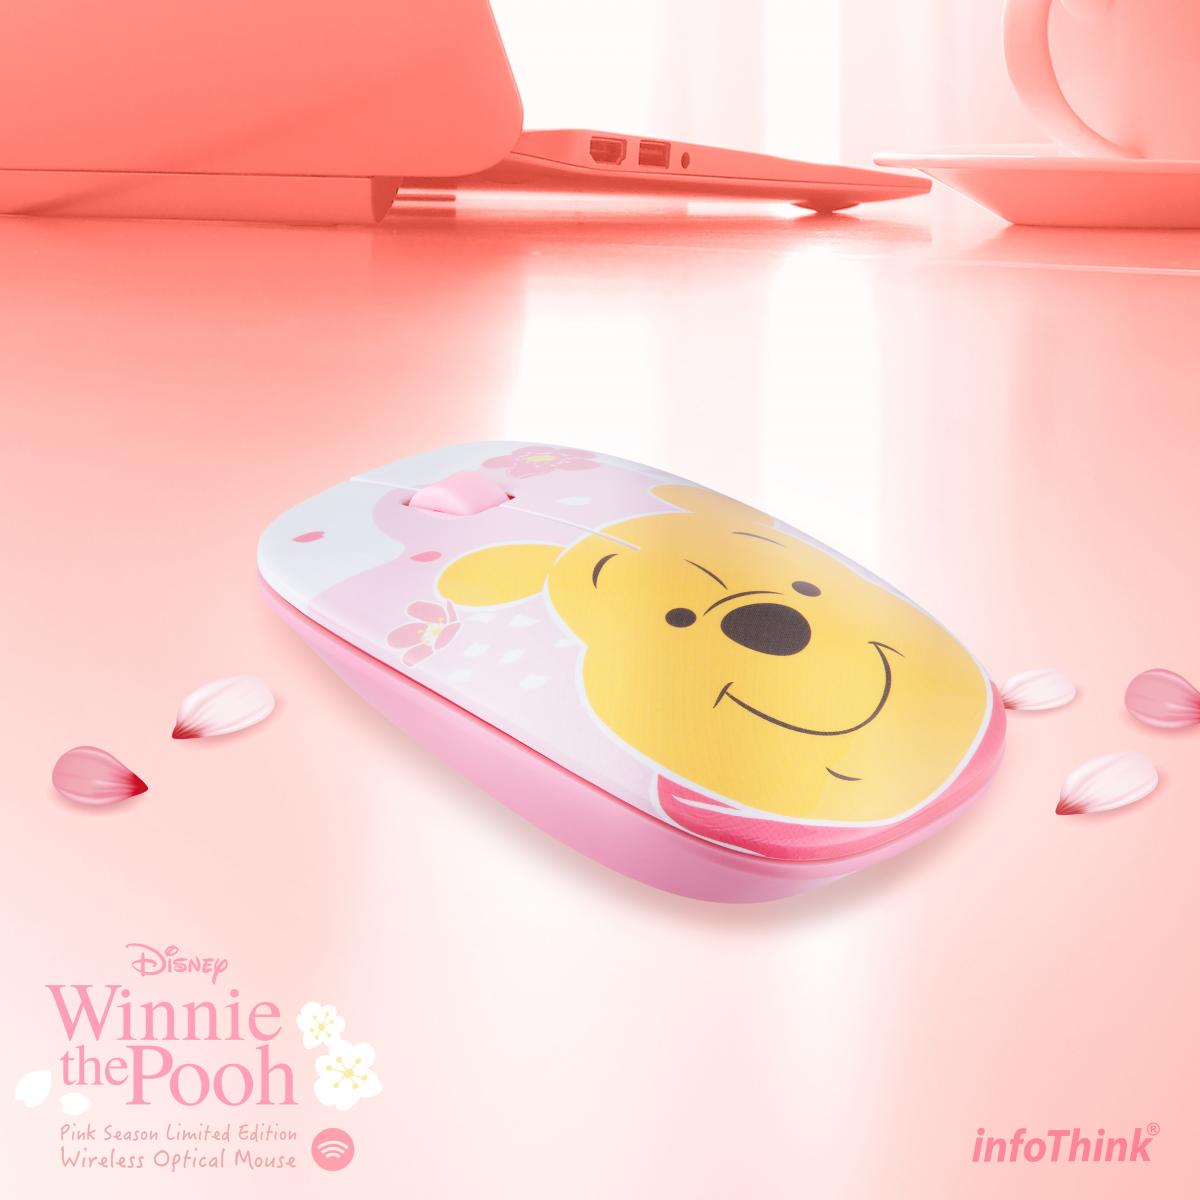 Infothink Disney Cherry Blossom Winnie The Pooh ver Wireless Optical Mouse